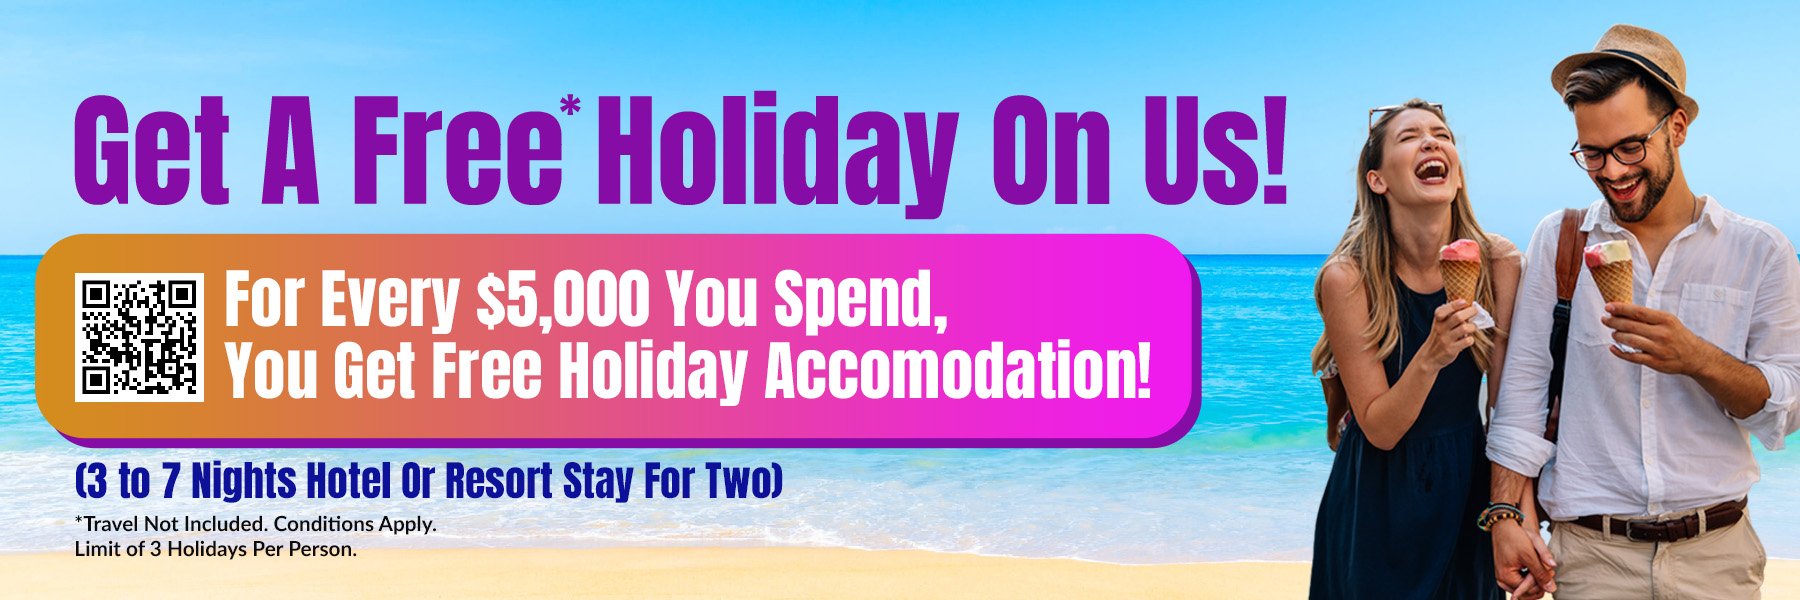 Get a Free* holiday On Us! - Promotional banner